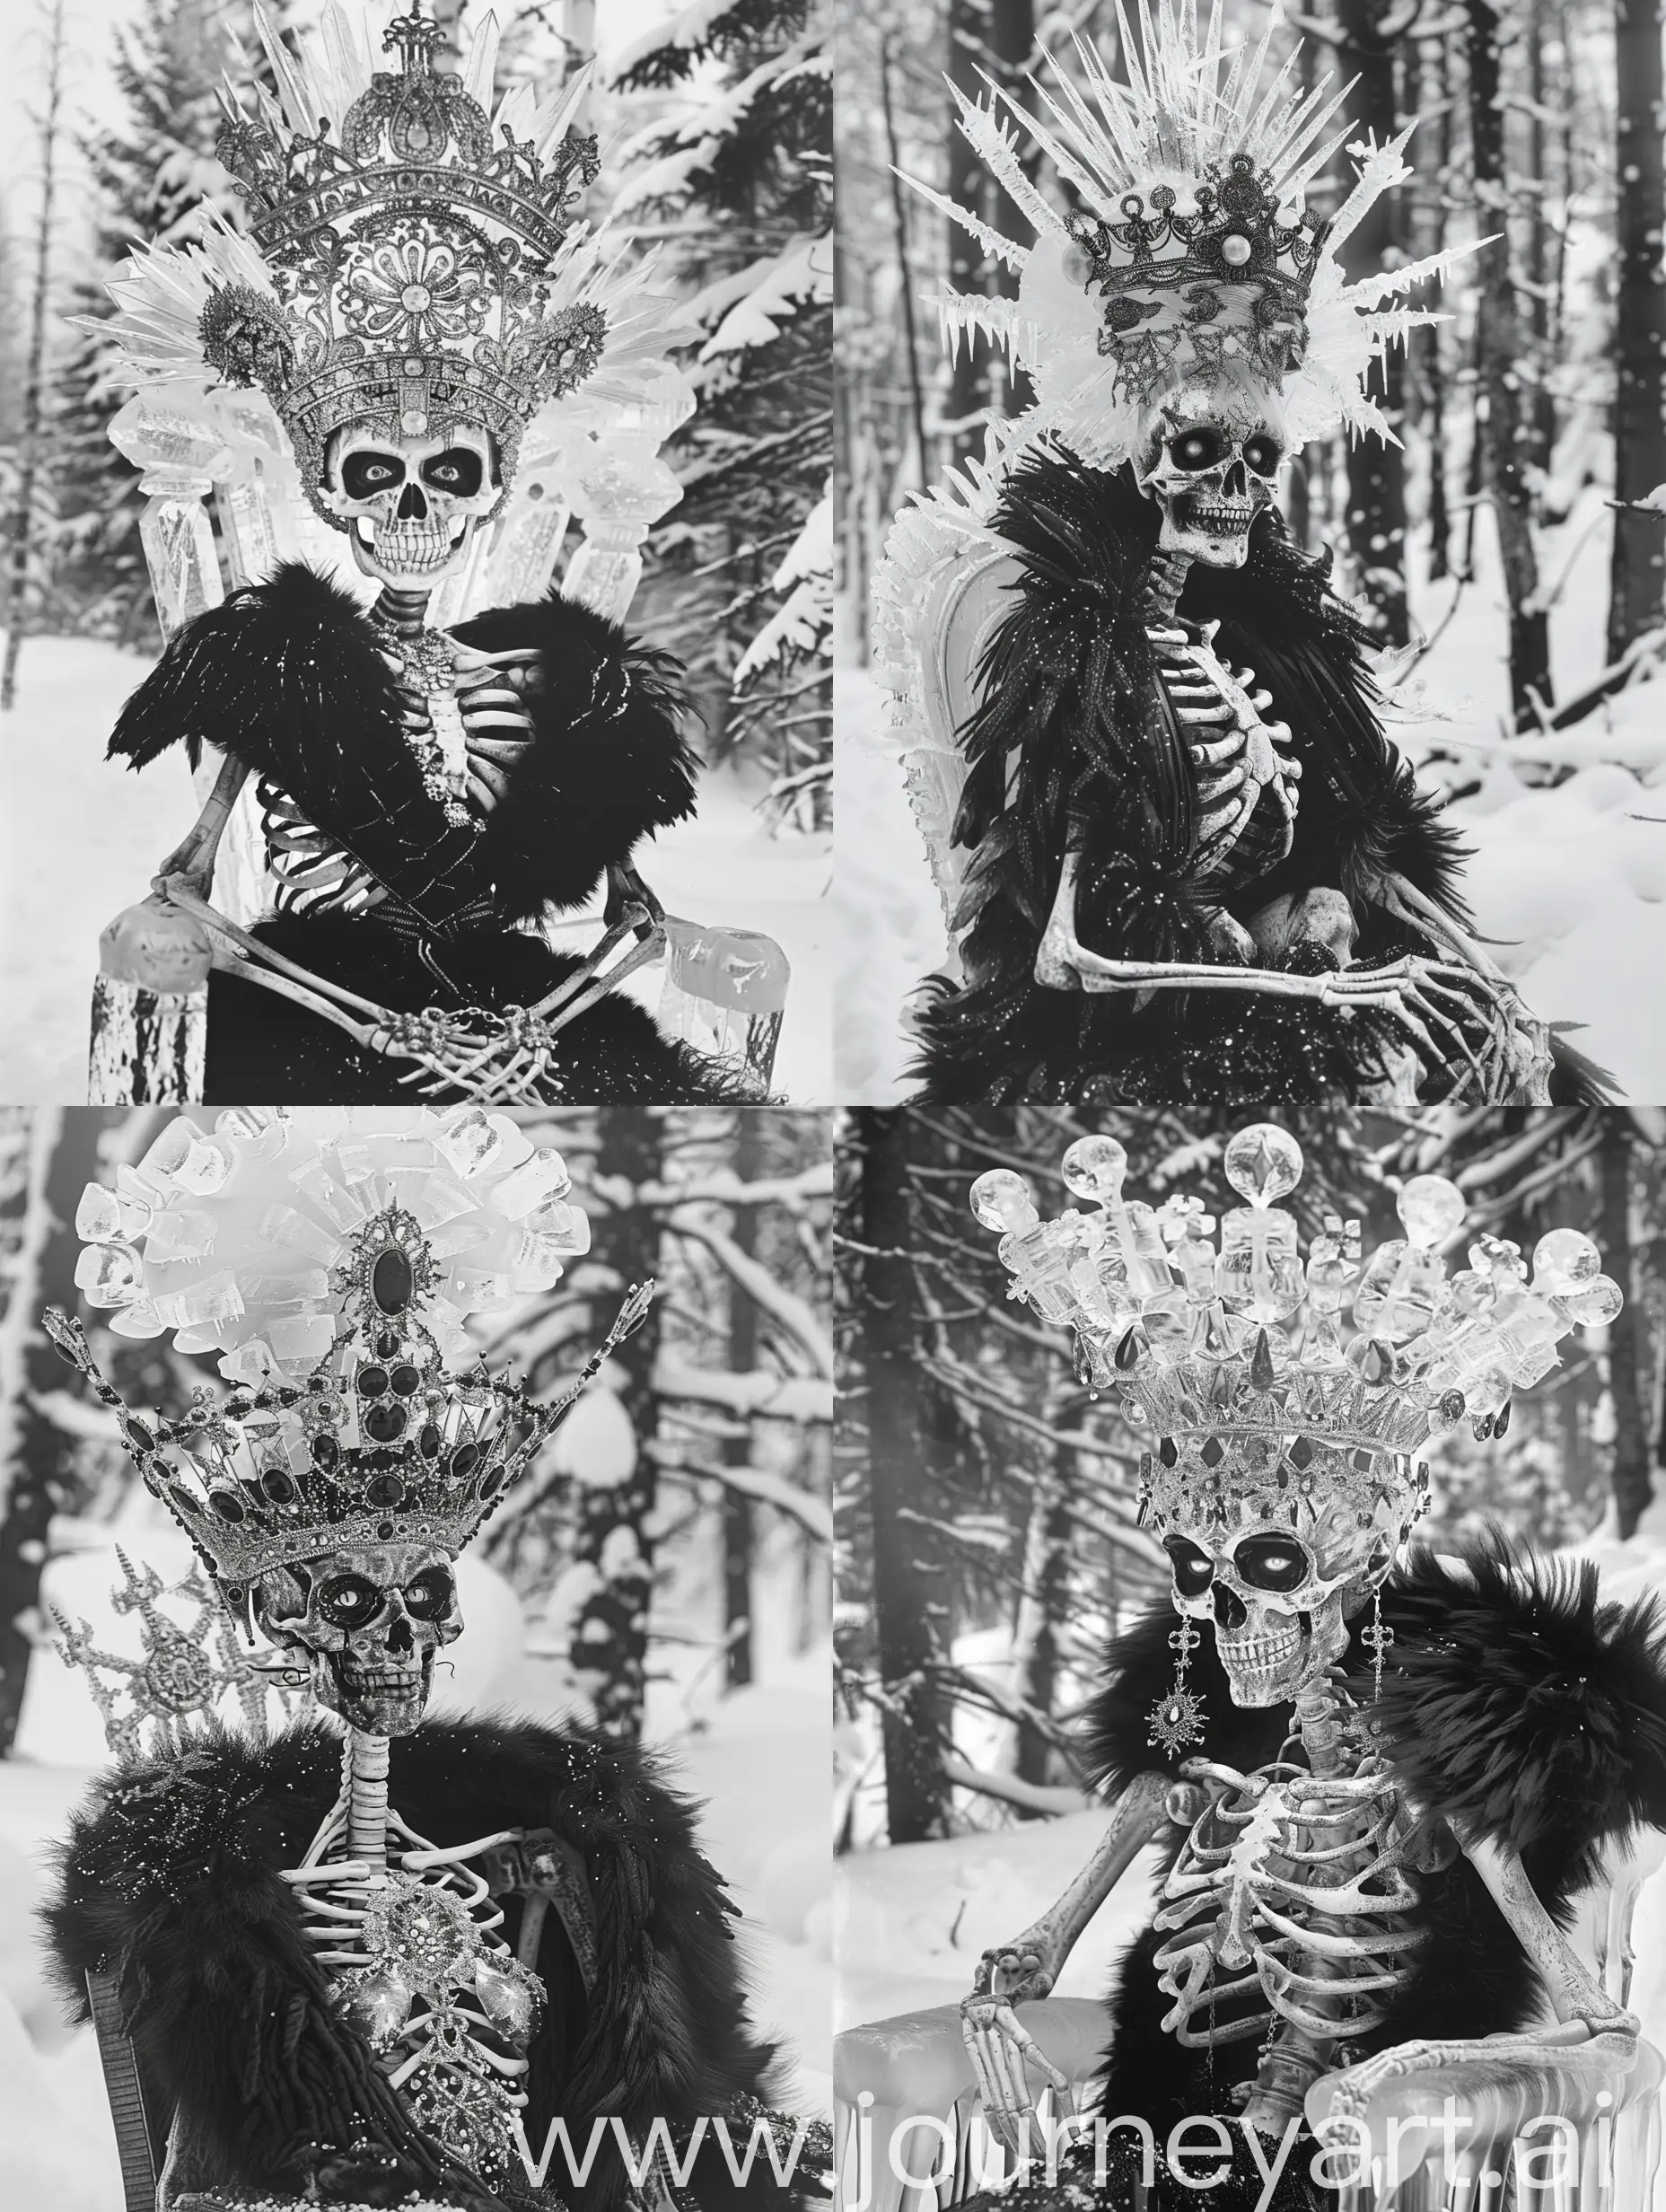 Eerie-Ice-Queen-Haunting-Monarch-on-Throne-in-Snowy-Forest